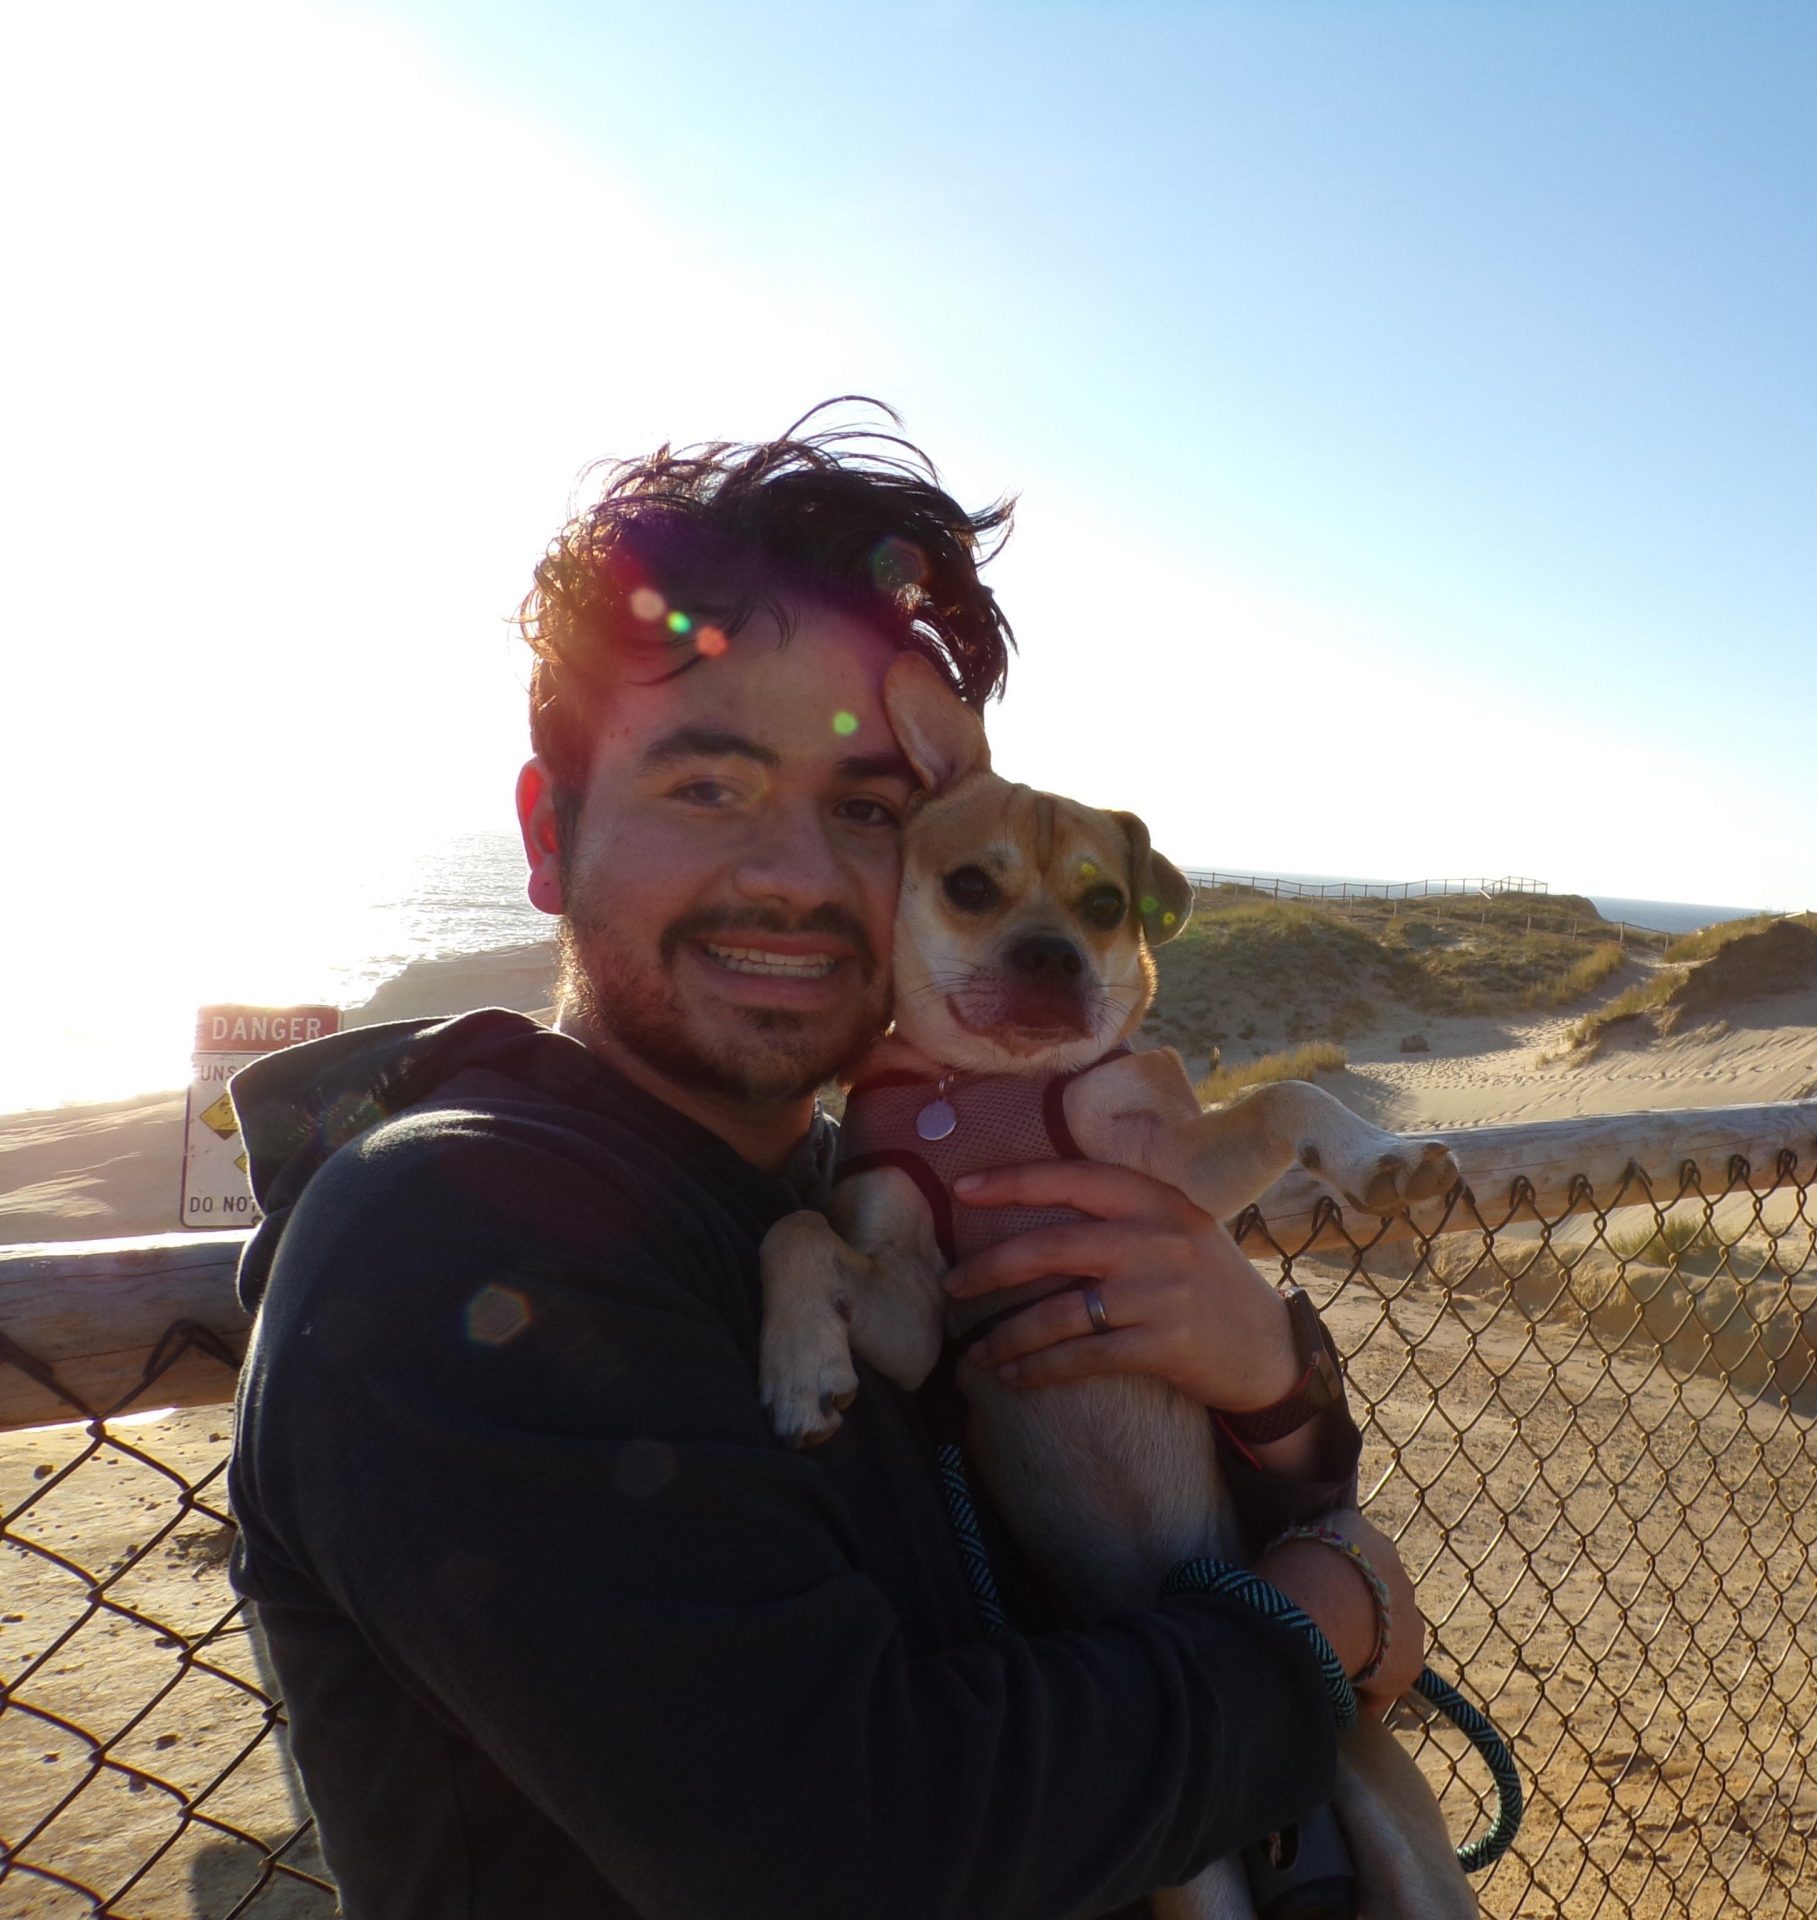 A photo of Andres and his small dog on the beach